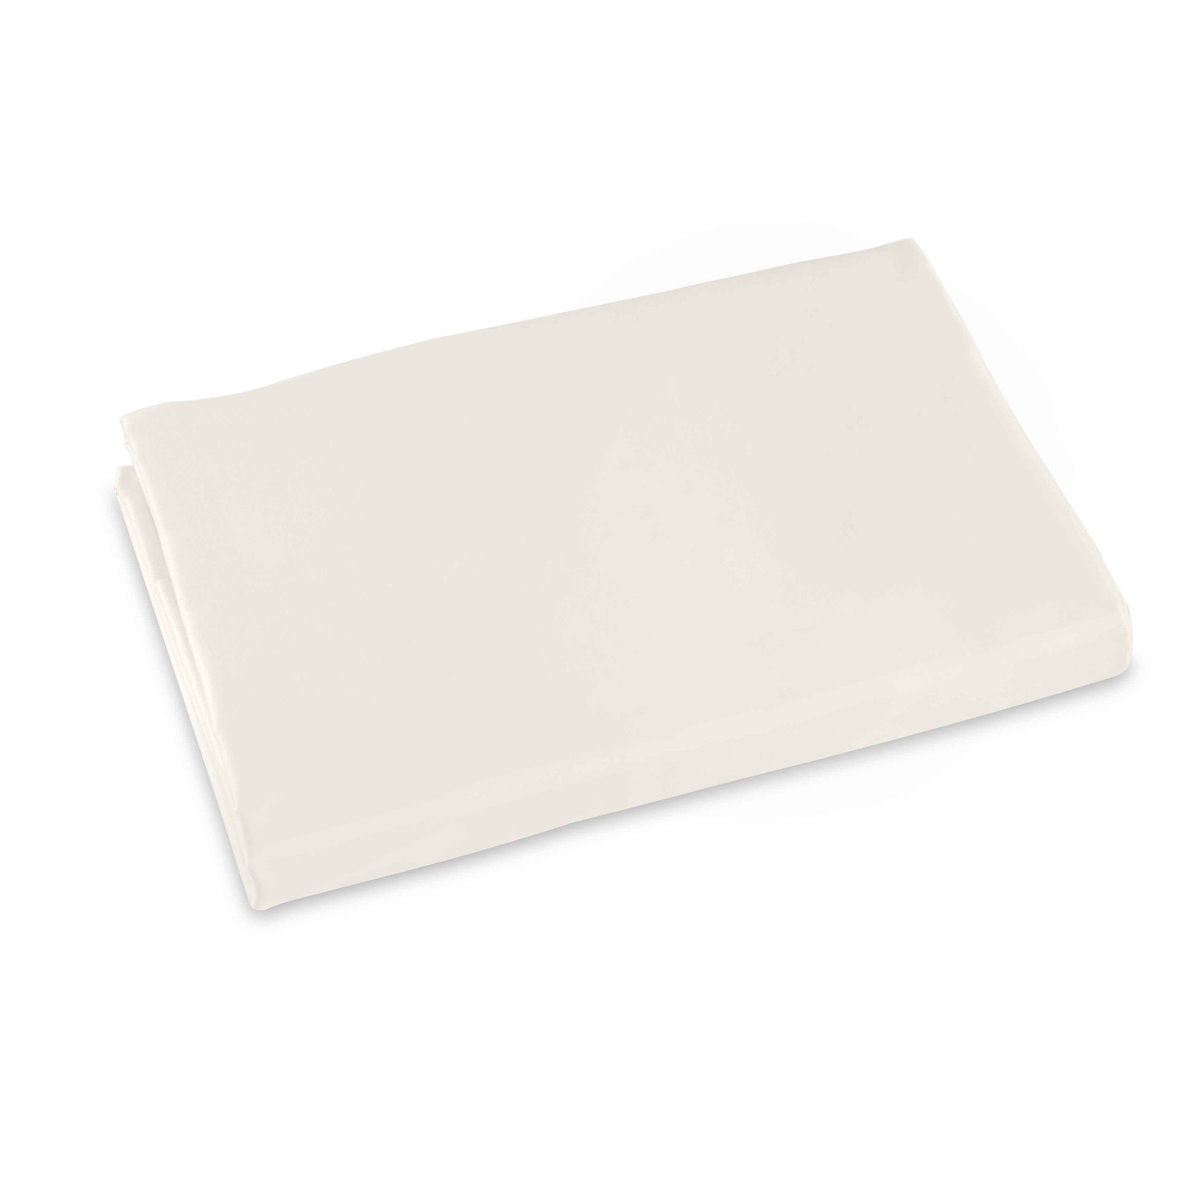 Folded Silo of Signoria Luce Bedding Fitted Sheet in Ivory Color